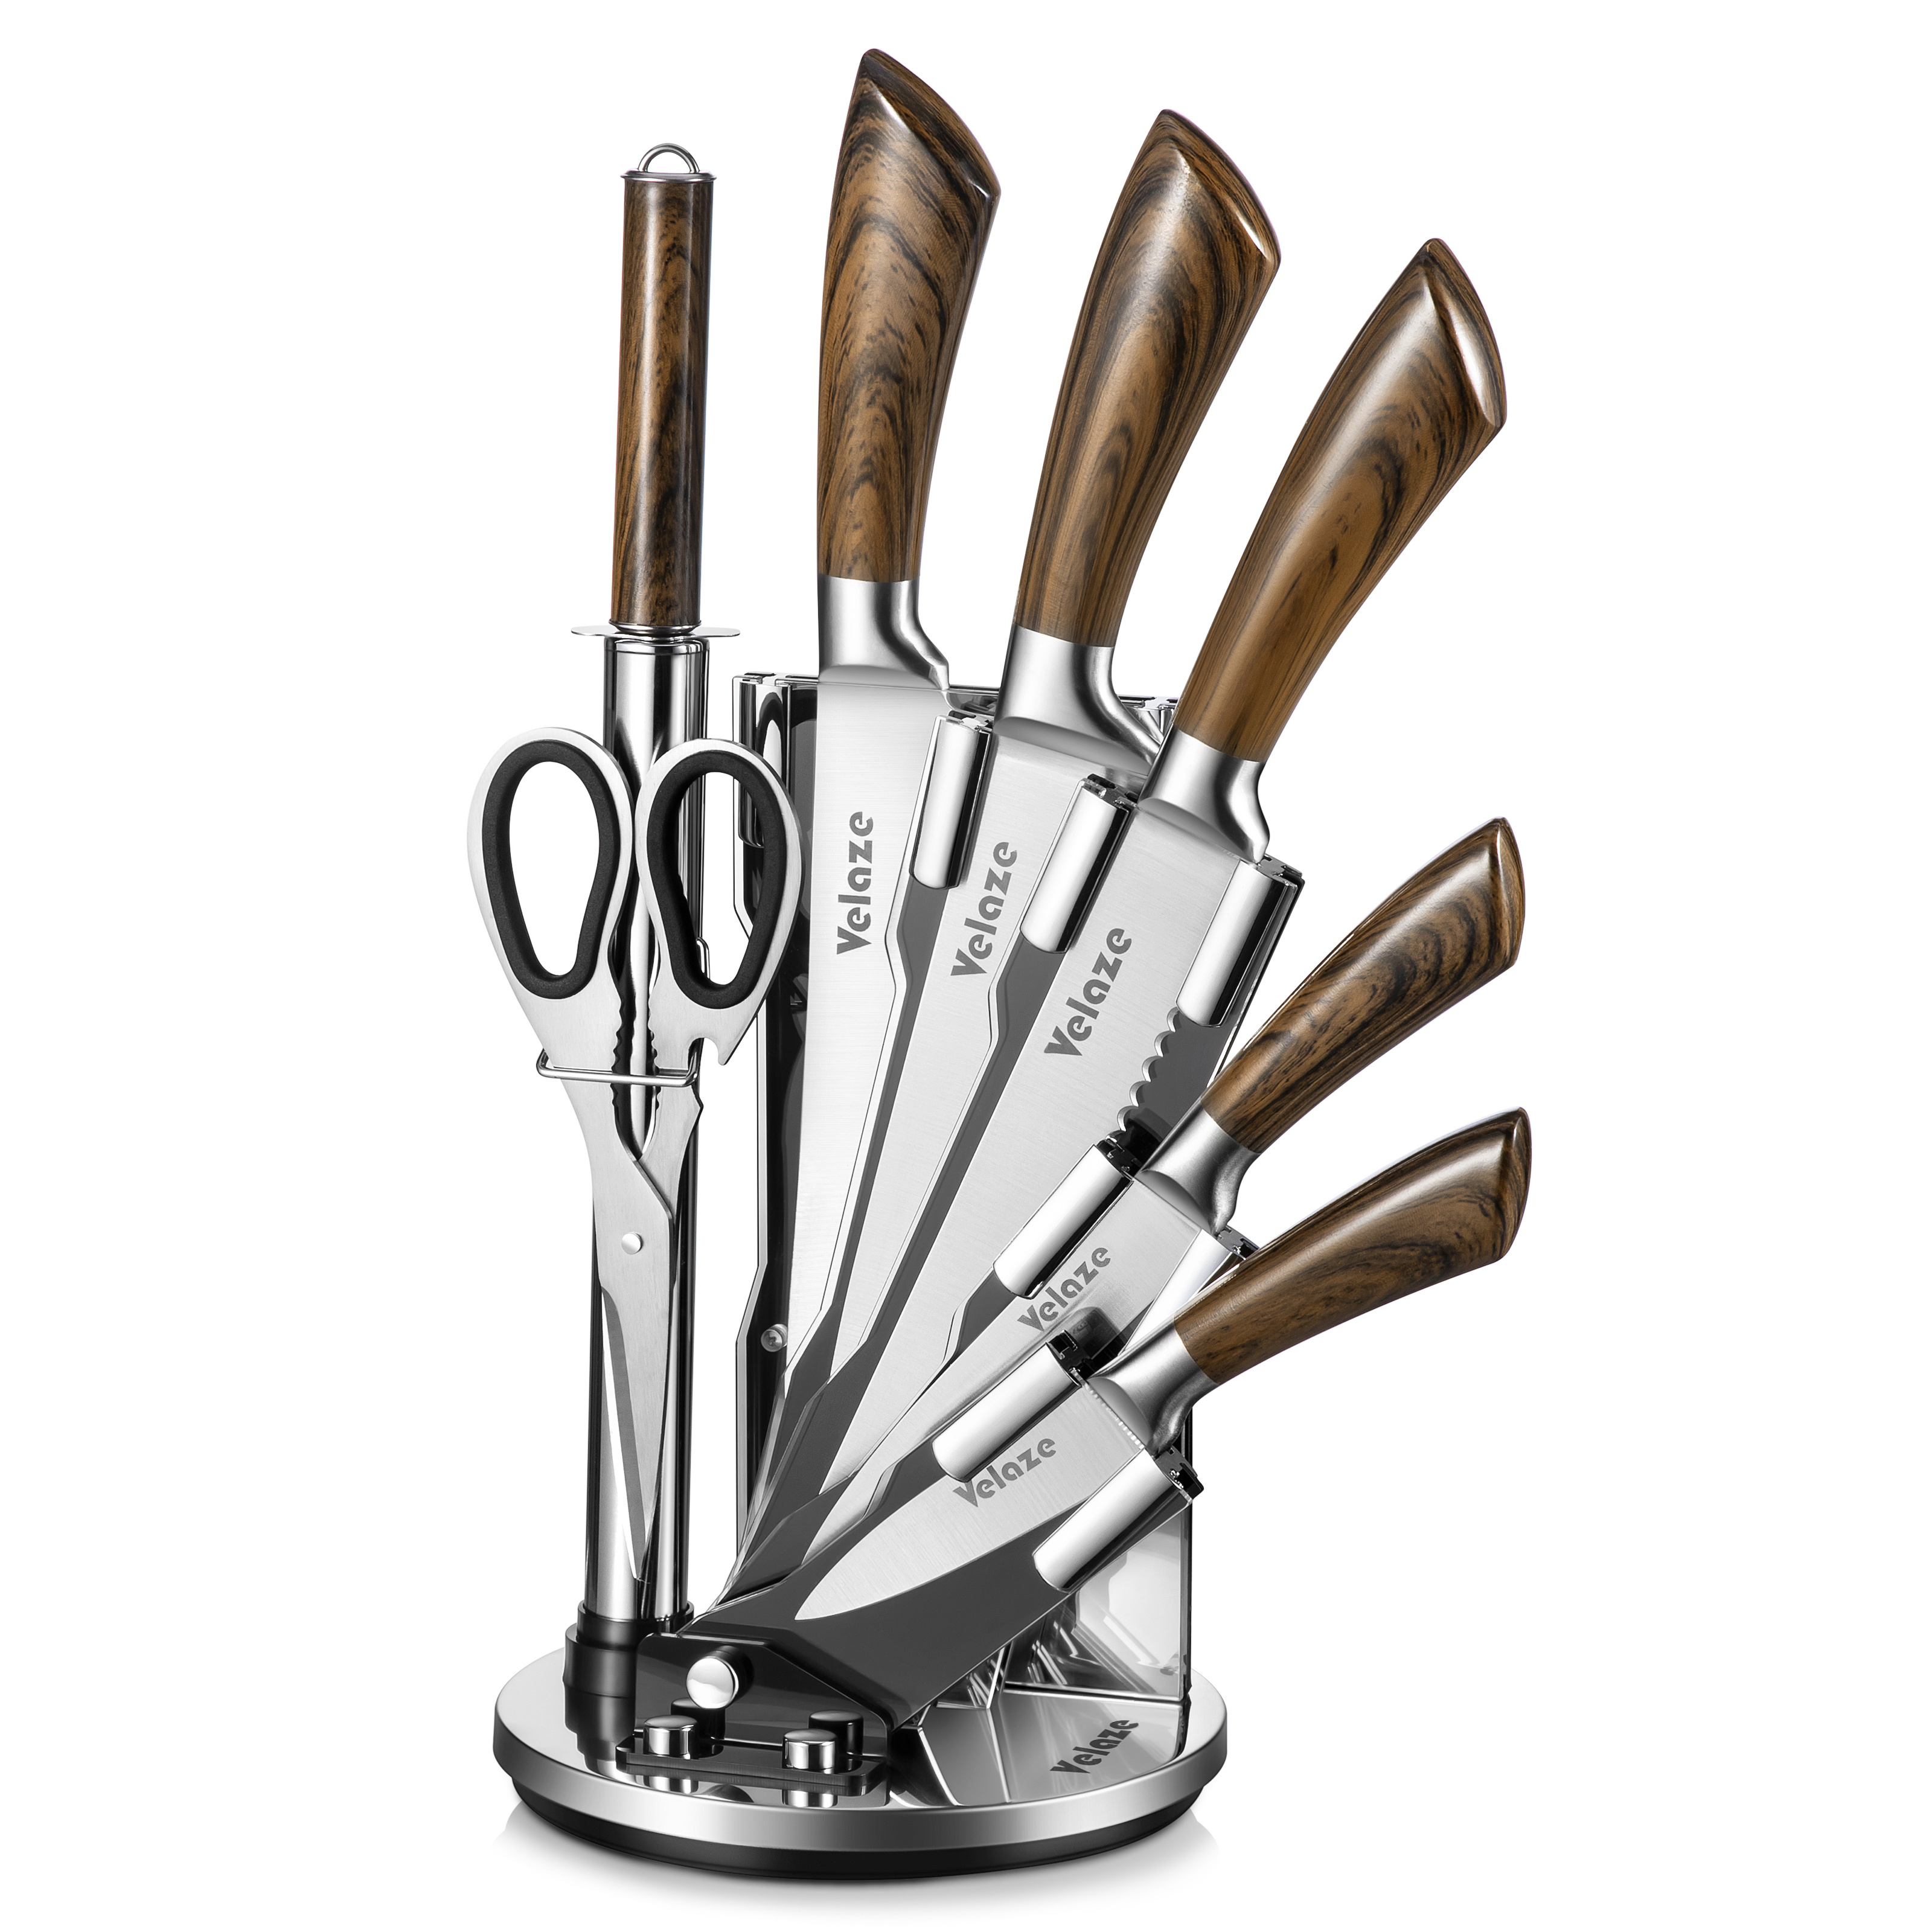 

8 Piece Stainless Steel Knife Set, Knife Block With Knife Set, Kitchen Knife Set With Ergonomic Handle, Chef's Knife Carving Knife Bread Knife Kitchen Scissors Sharpened Steel, Extra Sharp